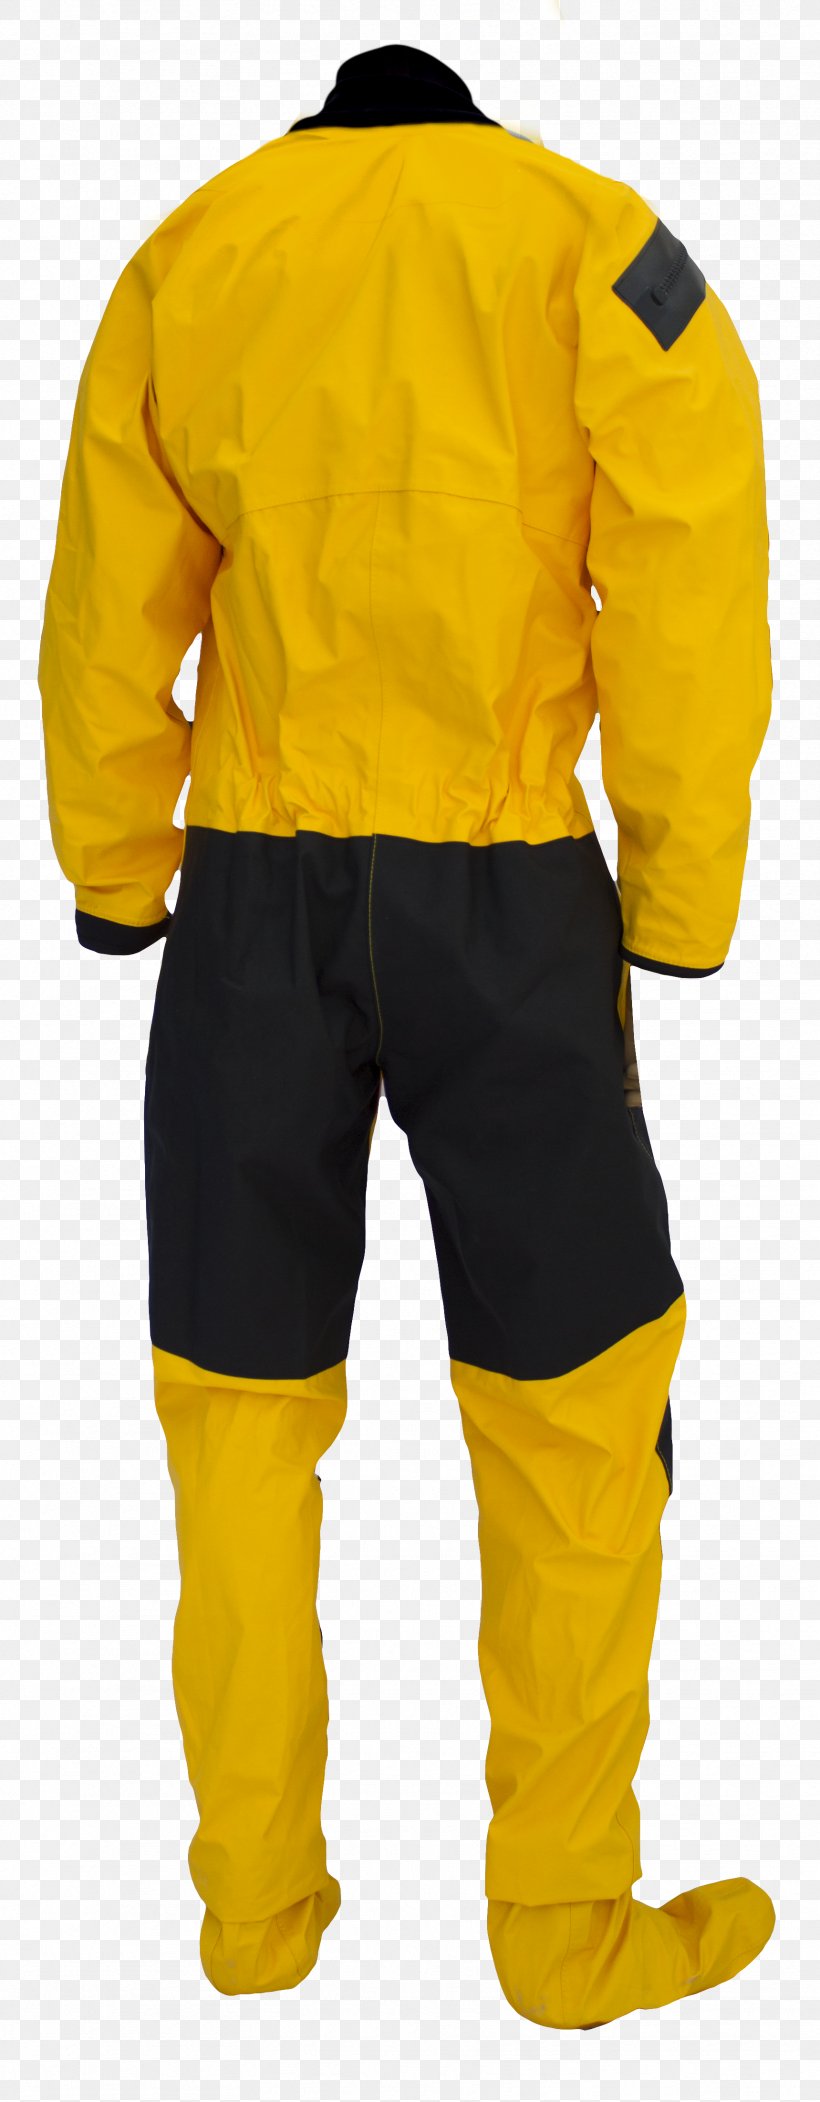 Dry Suit Tracksuit Jacket Clothing Fashion, PNG, 1719x4408px, Dry Suit, Clothing, Dress, Fashion, Jacket Download Free